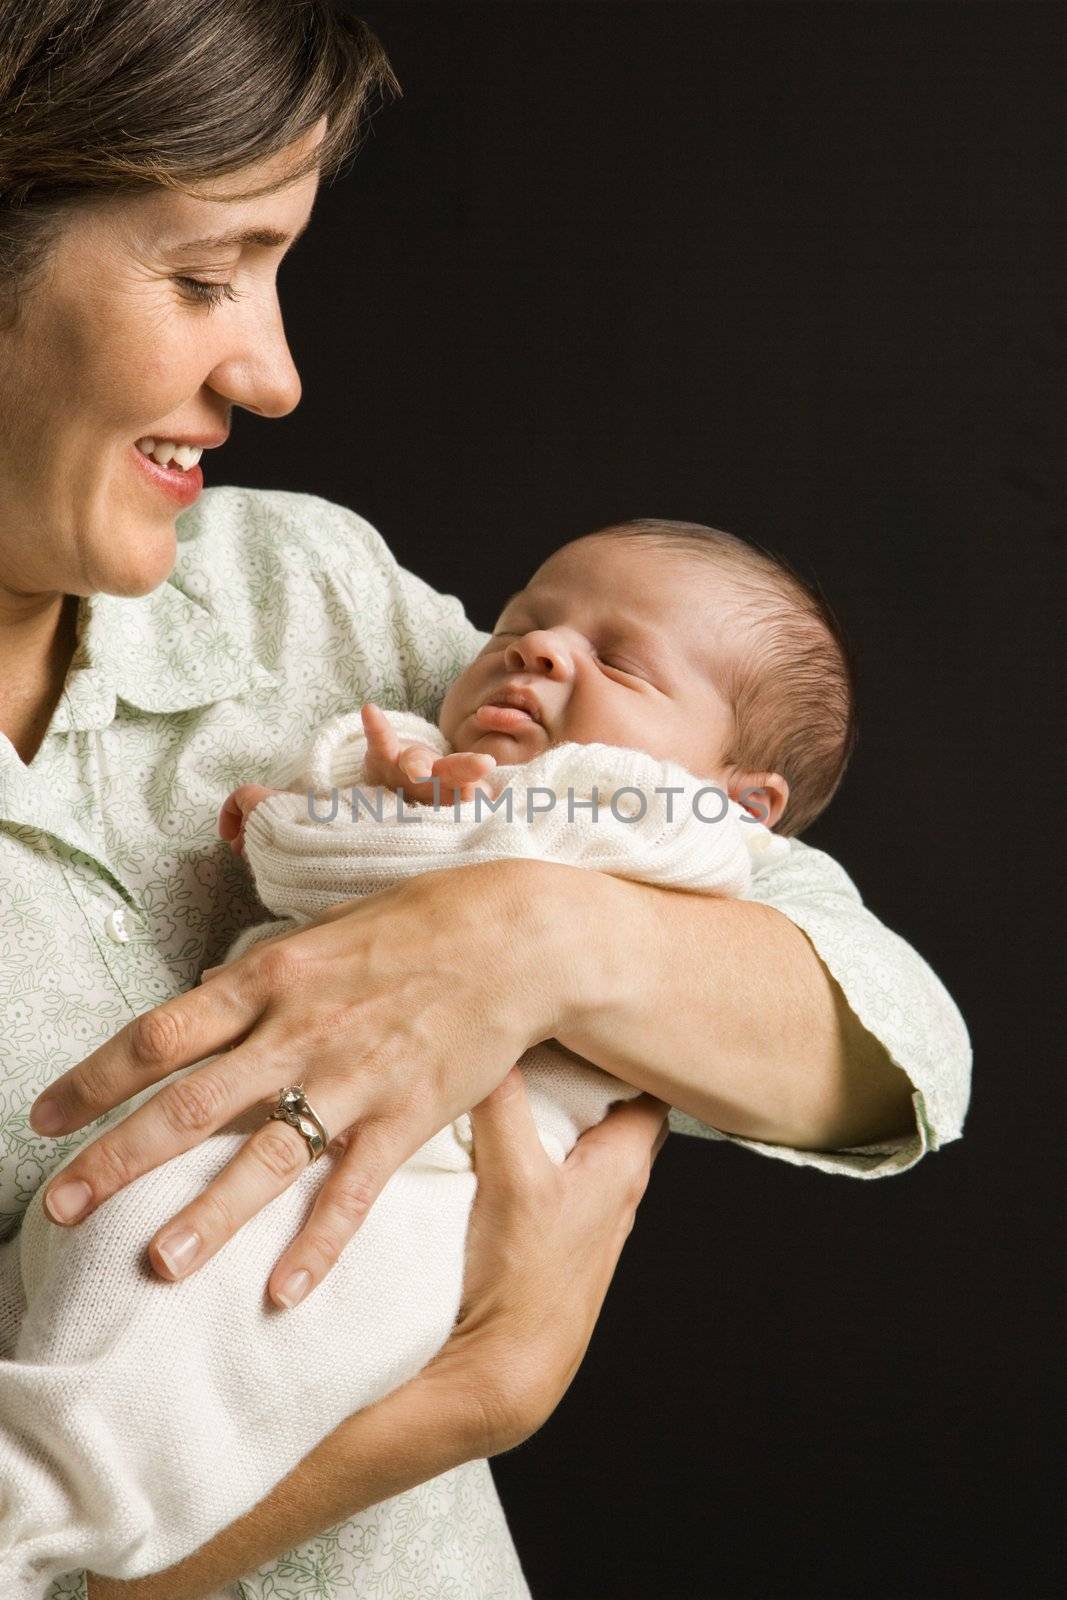 Mother smiling holding baby against black background.